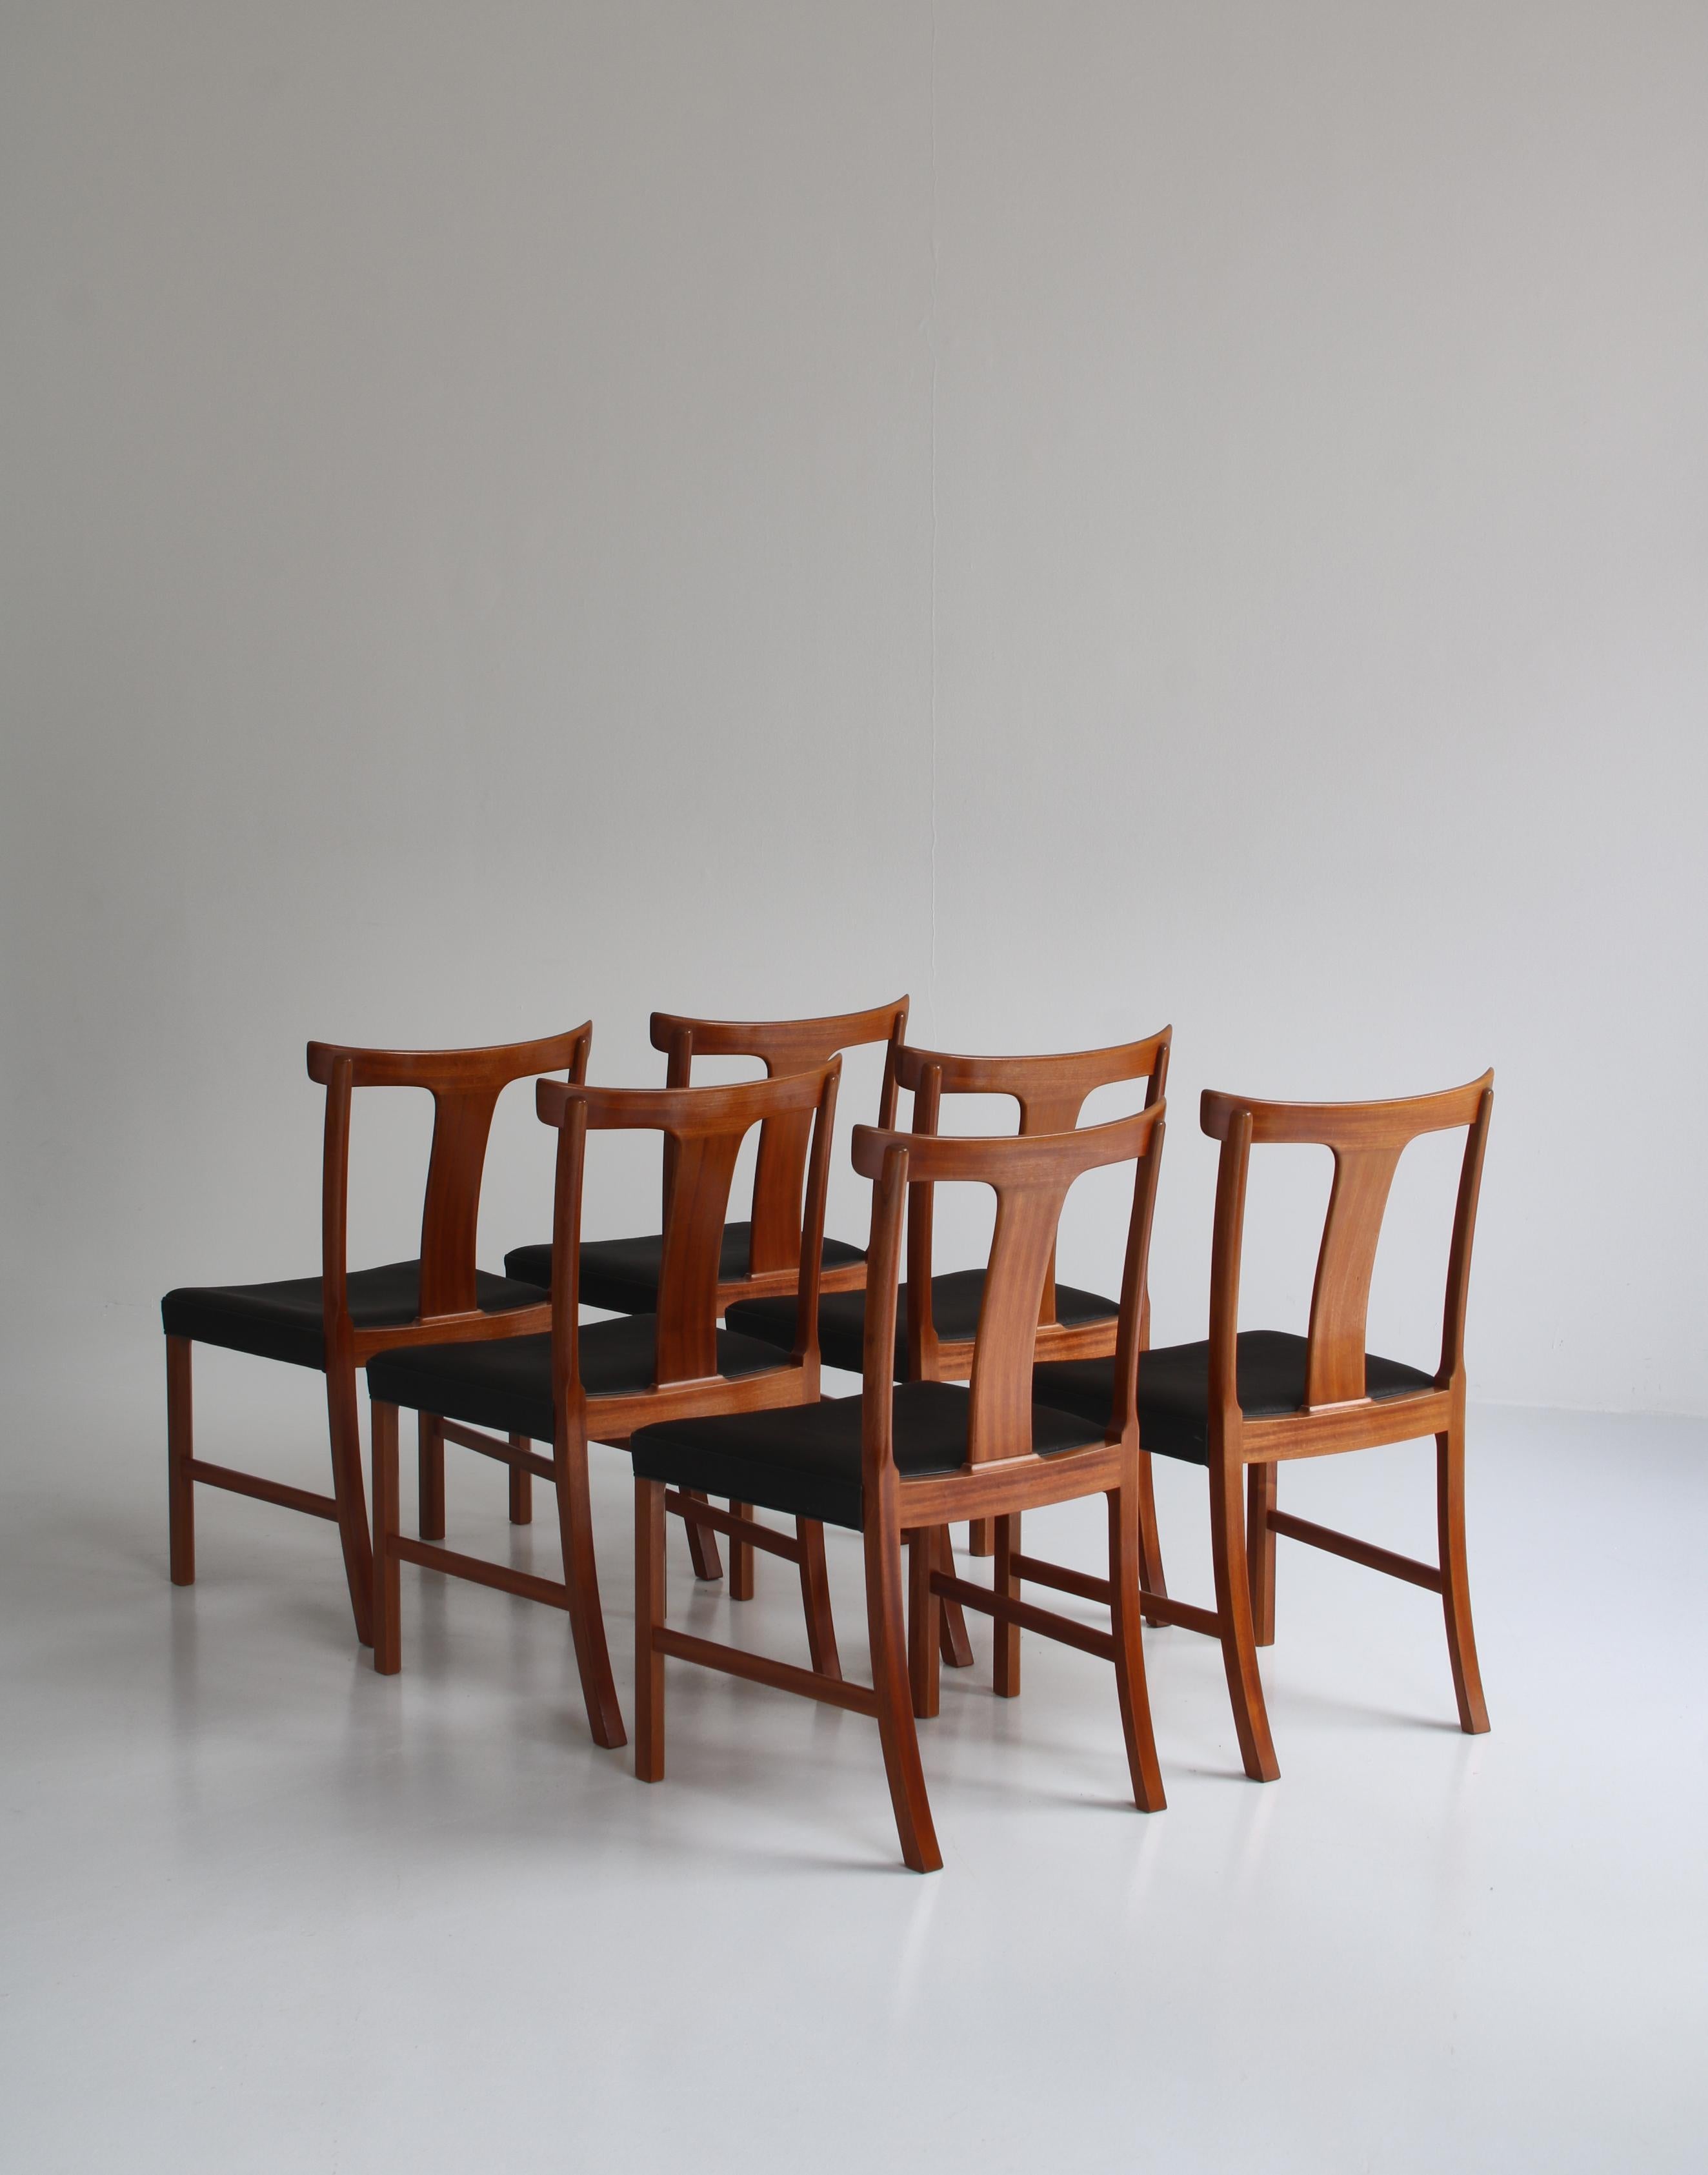 Ole Wanscher Dining Chairs in Mahogany and Horsehair Made by A.J. Iversen, 1960s For Sale 6